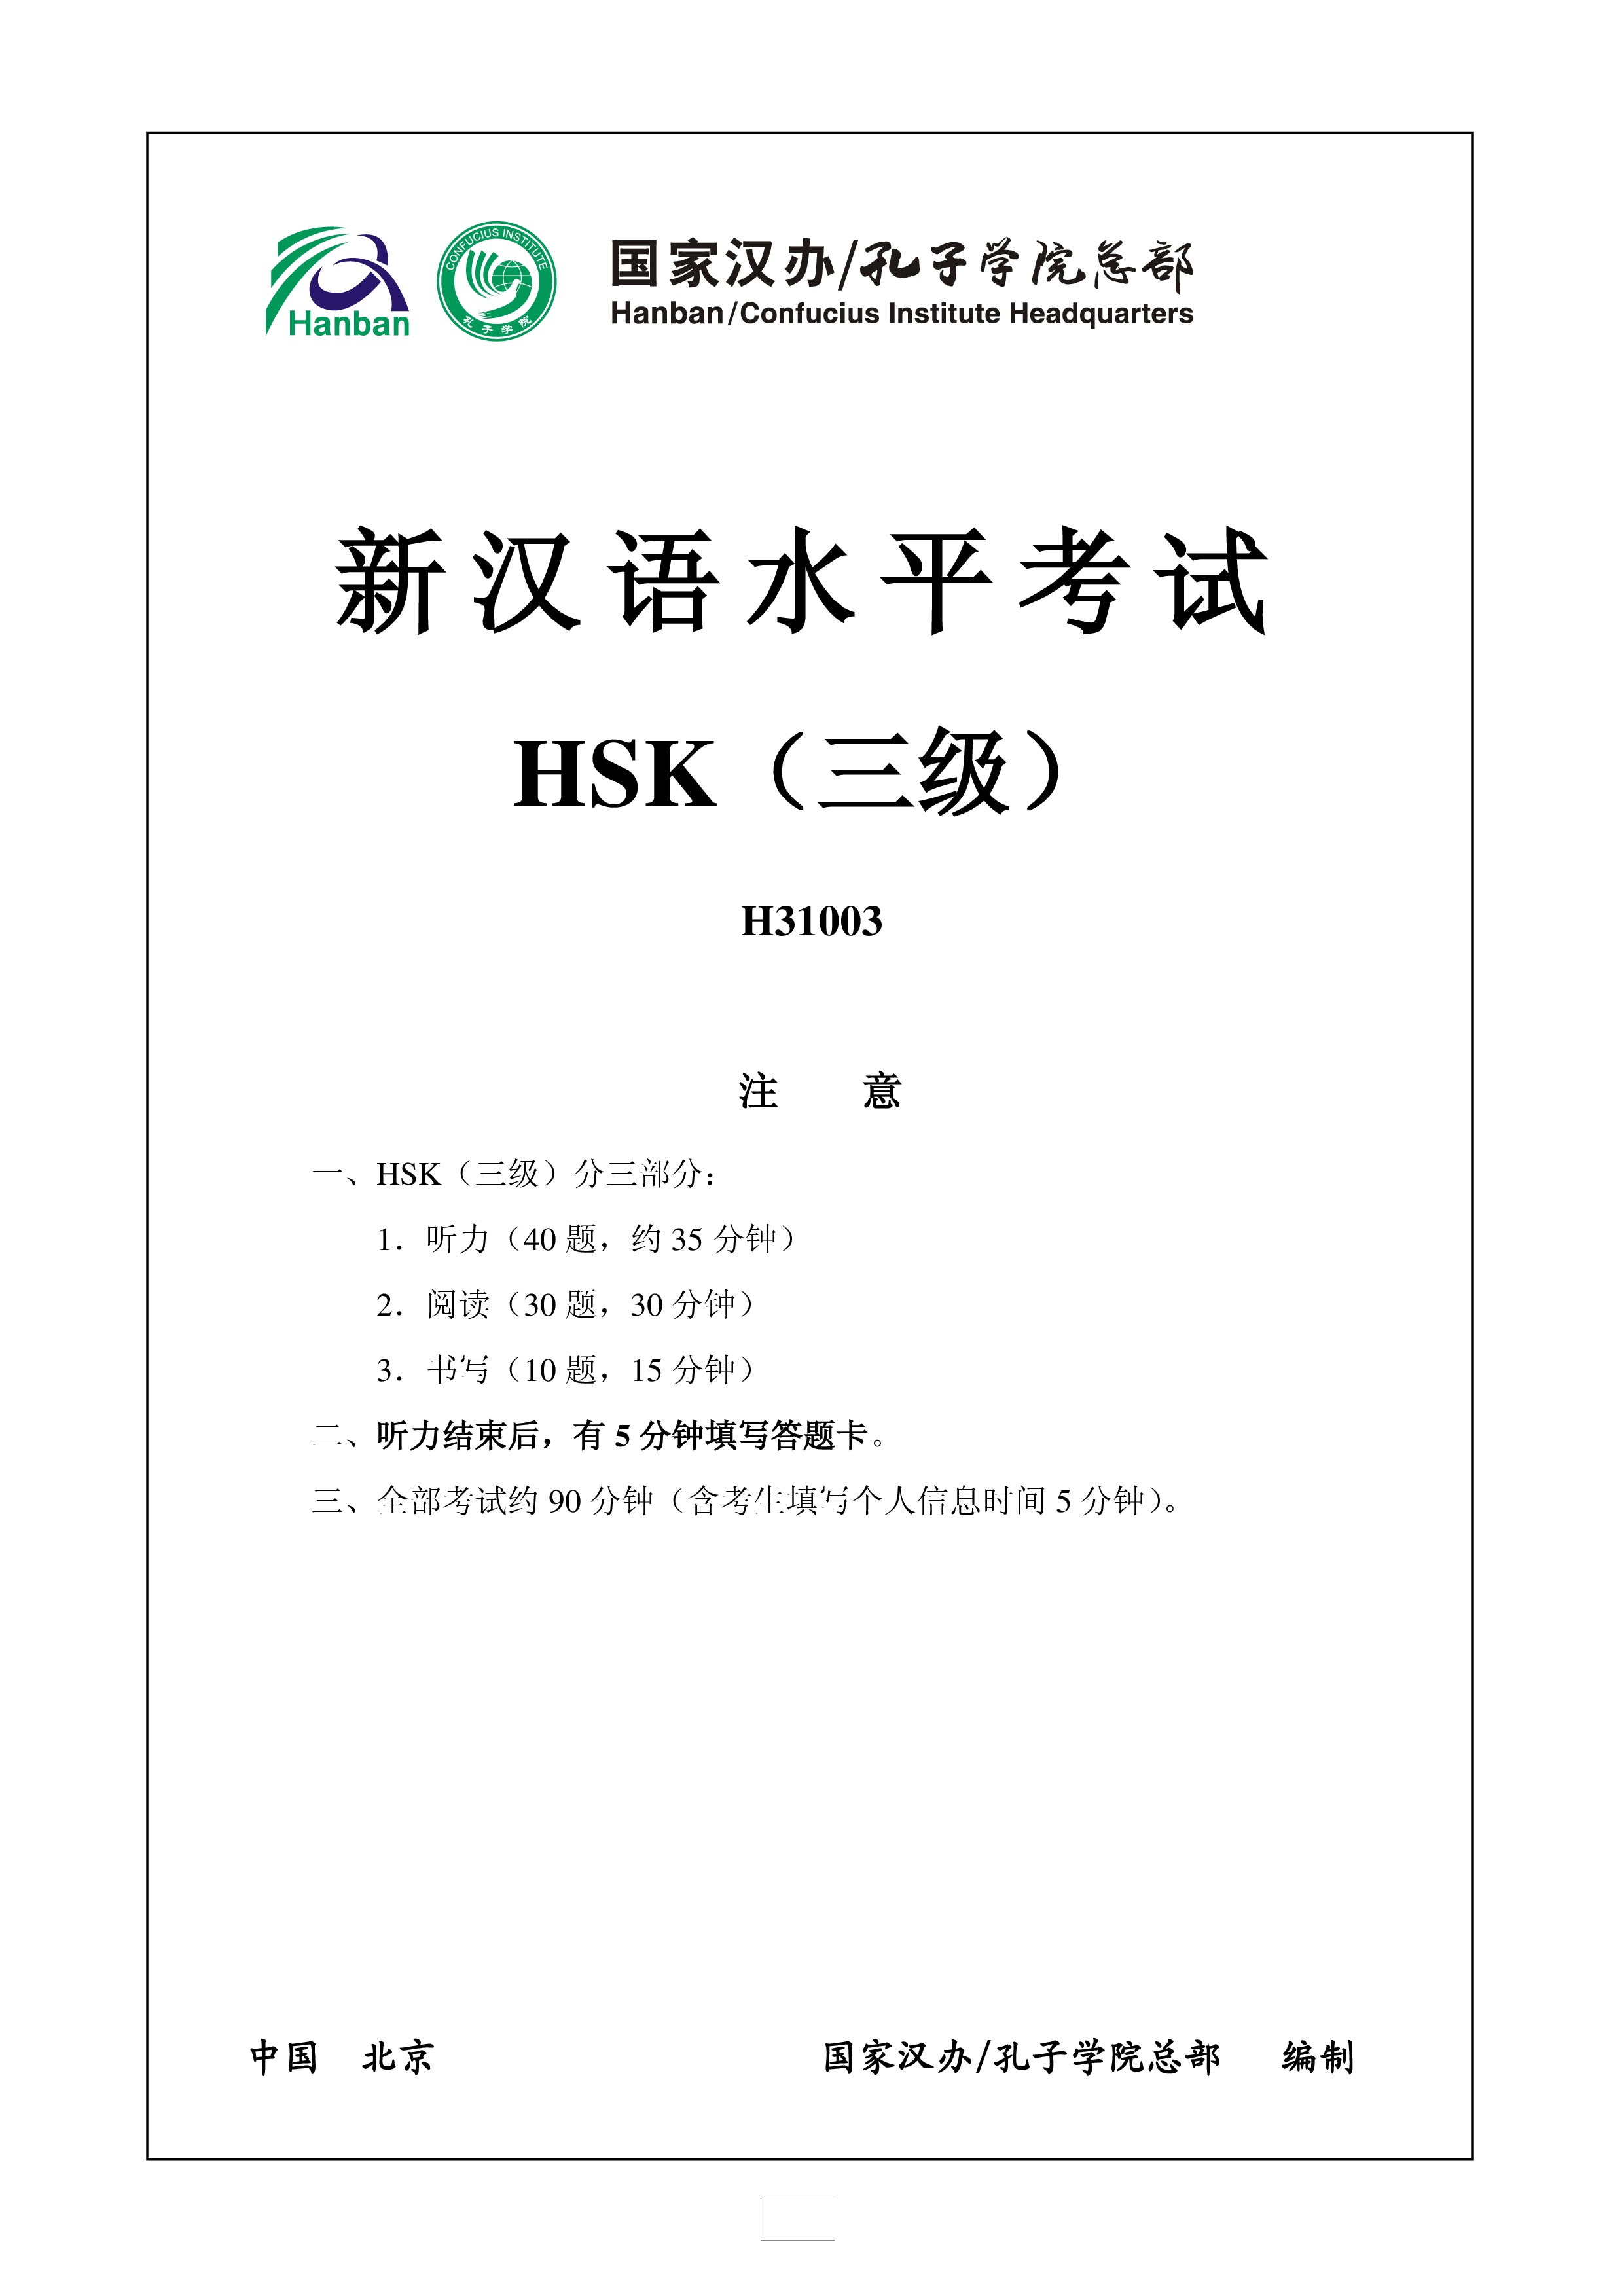 hsk3 chinese exam including answers hsk3 h31003 plantilla imagen principal